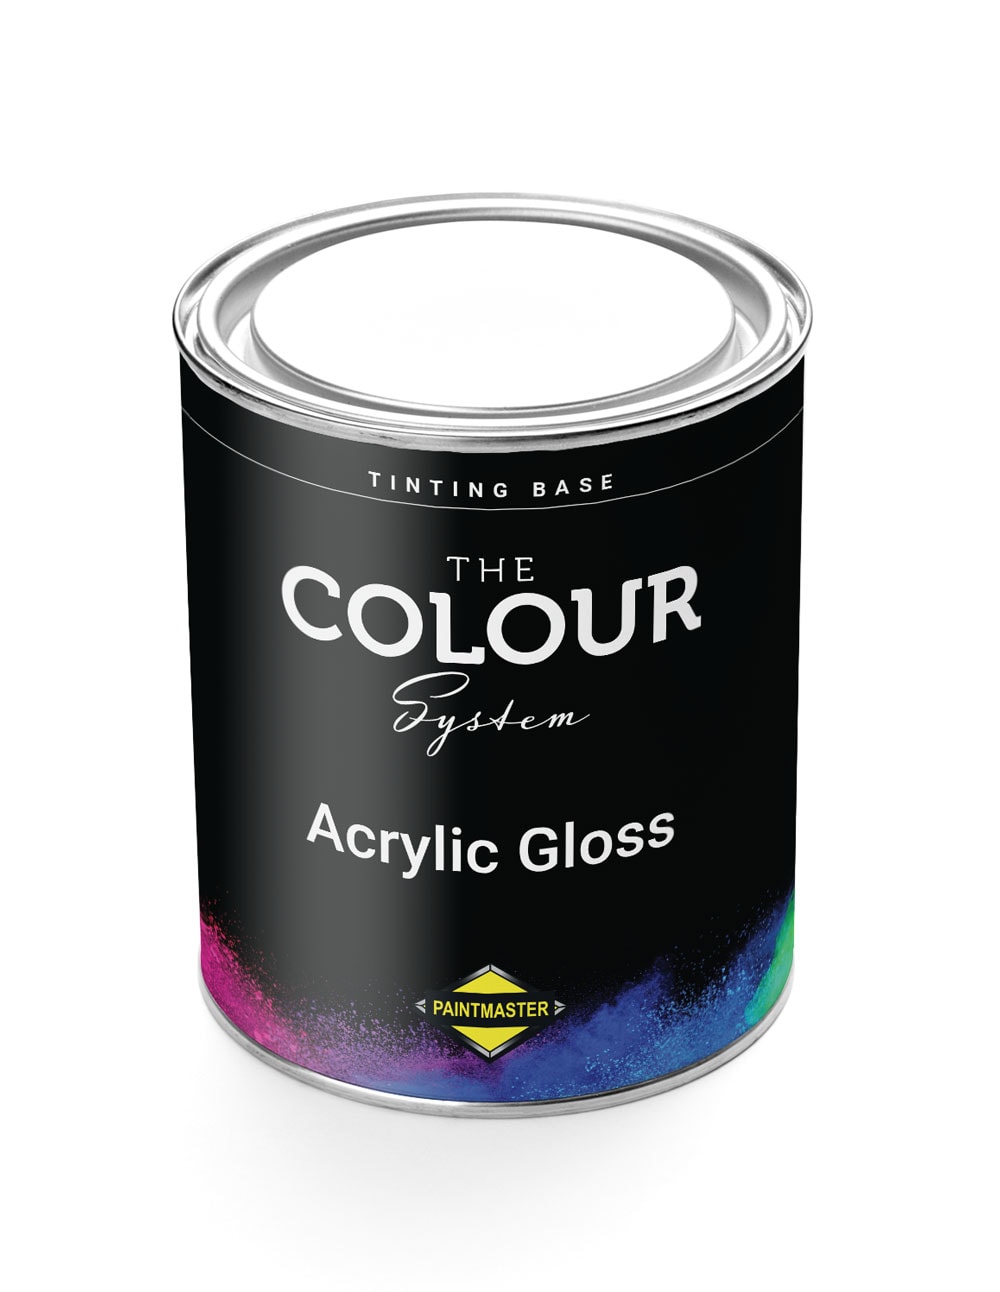 The Colour System Acrylic Gloss - Paintmaster